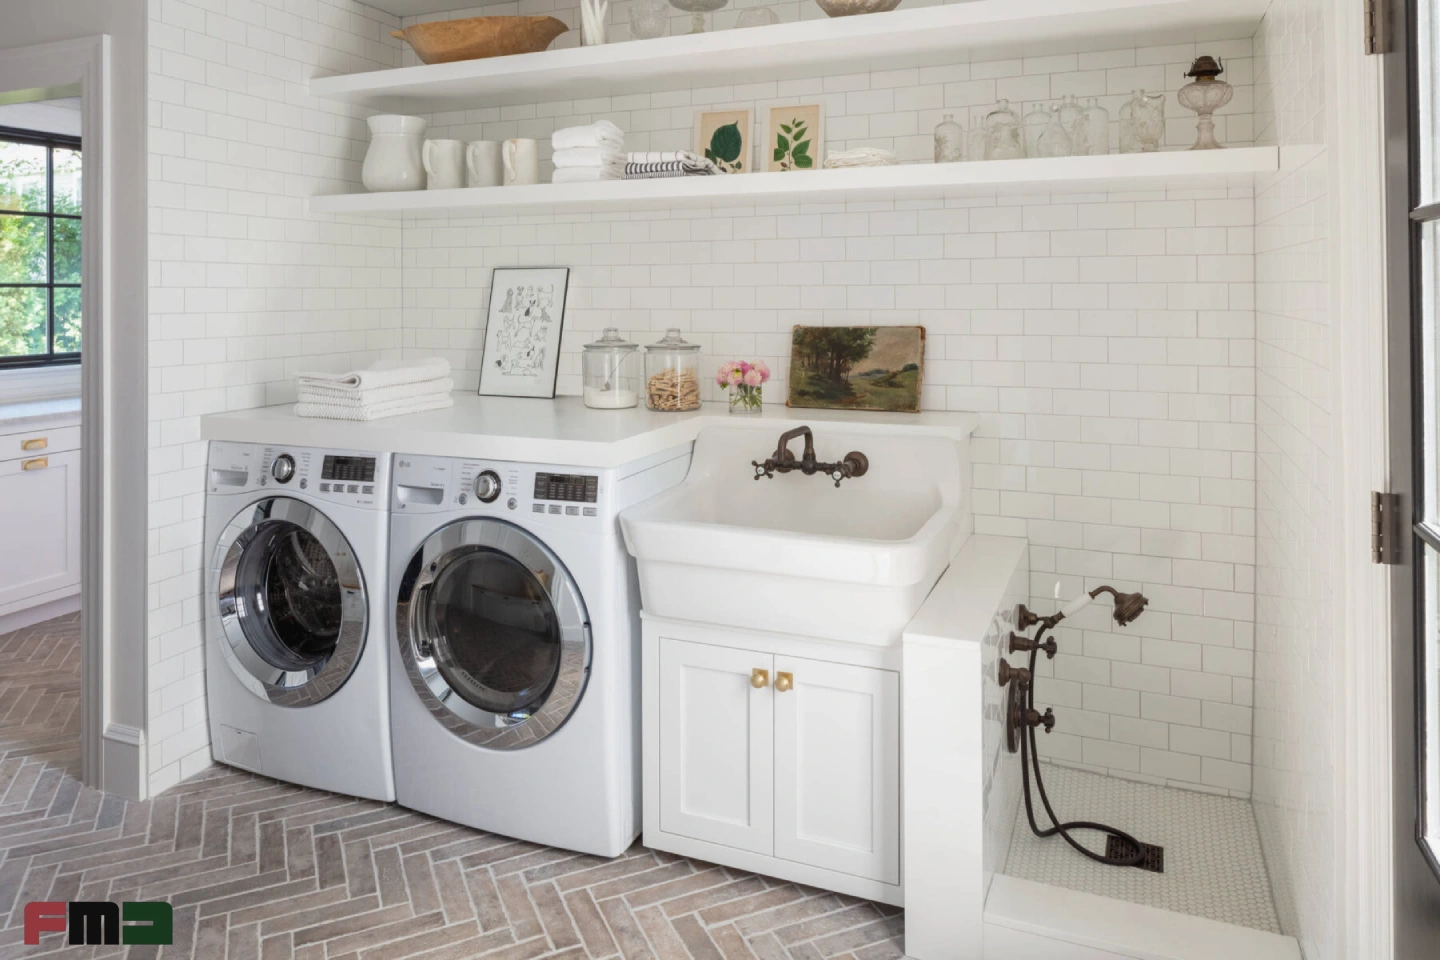 How to Maximize Storage in Small Laundry Room